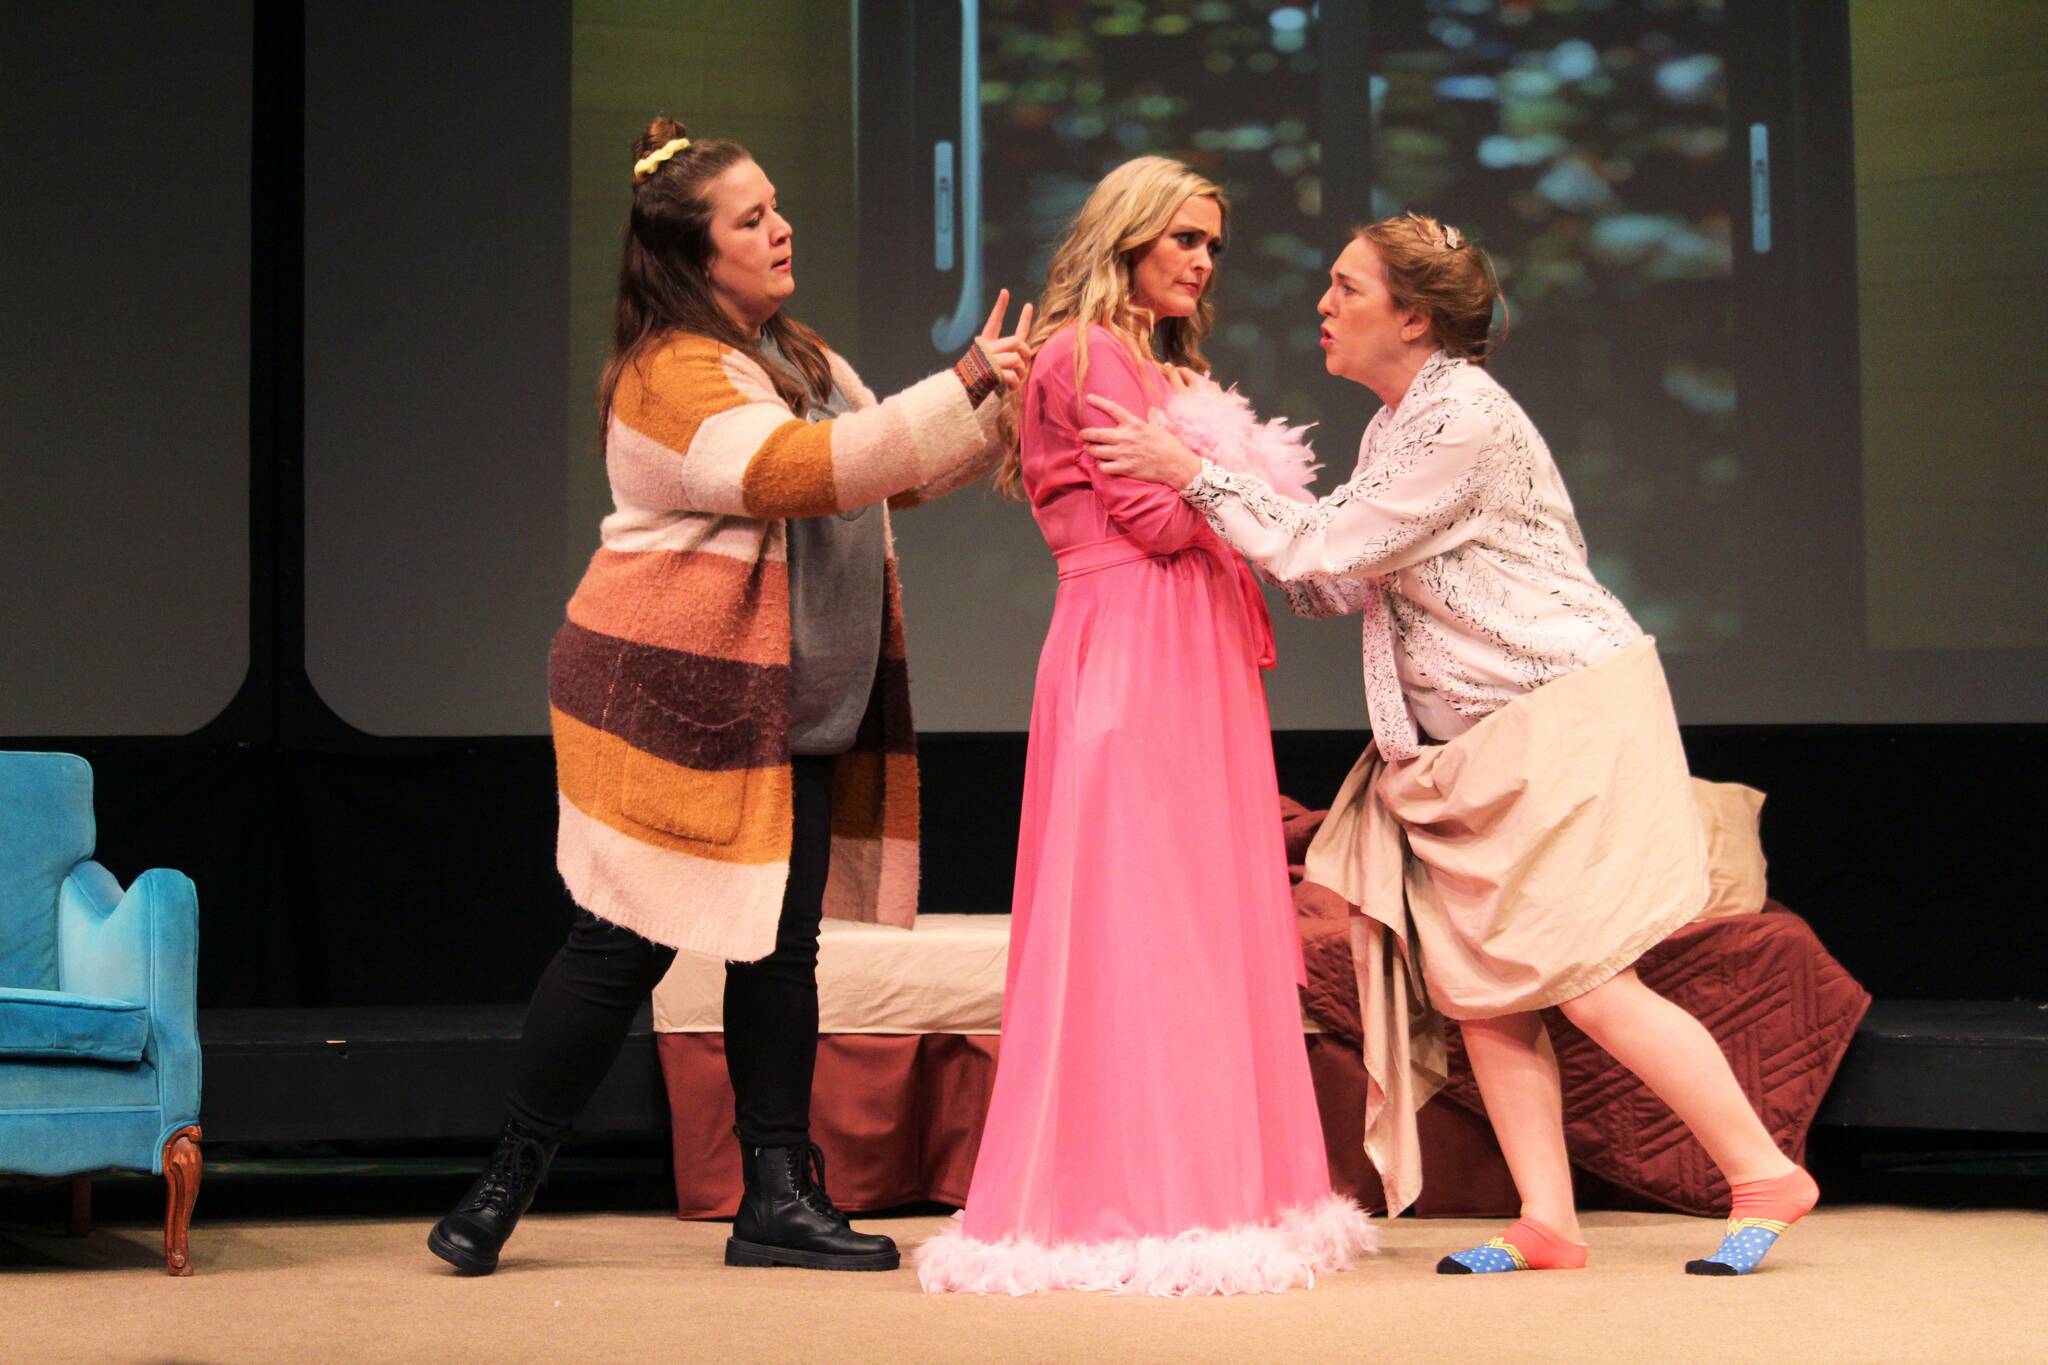 Photo by Karina Andrew/Whidbey News-Times
From left, Dianna Gruenwald, Abby Thuet and Tamra Sipes rehearse for the Whidbey Playhouse’s upcoming three-woman show, “The Taming.”